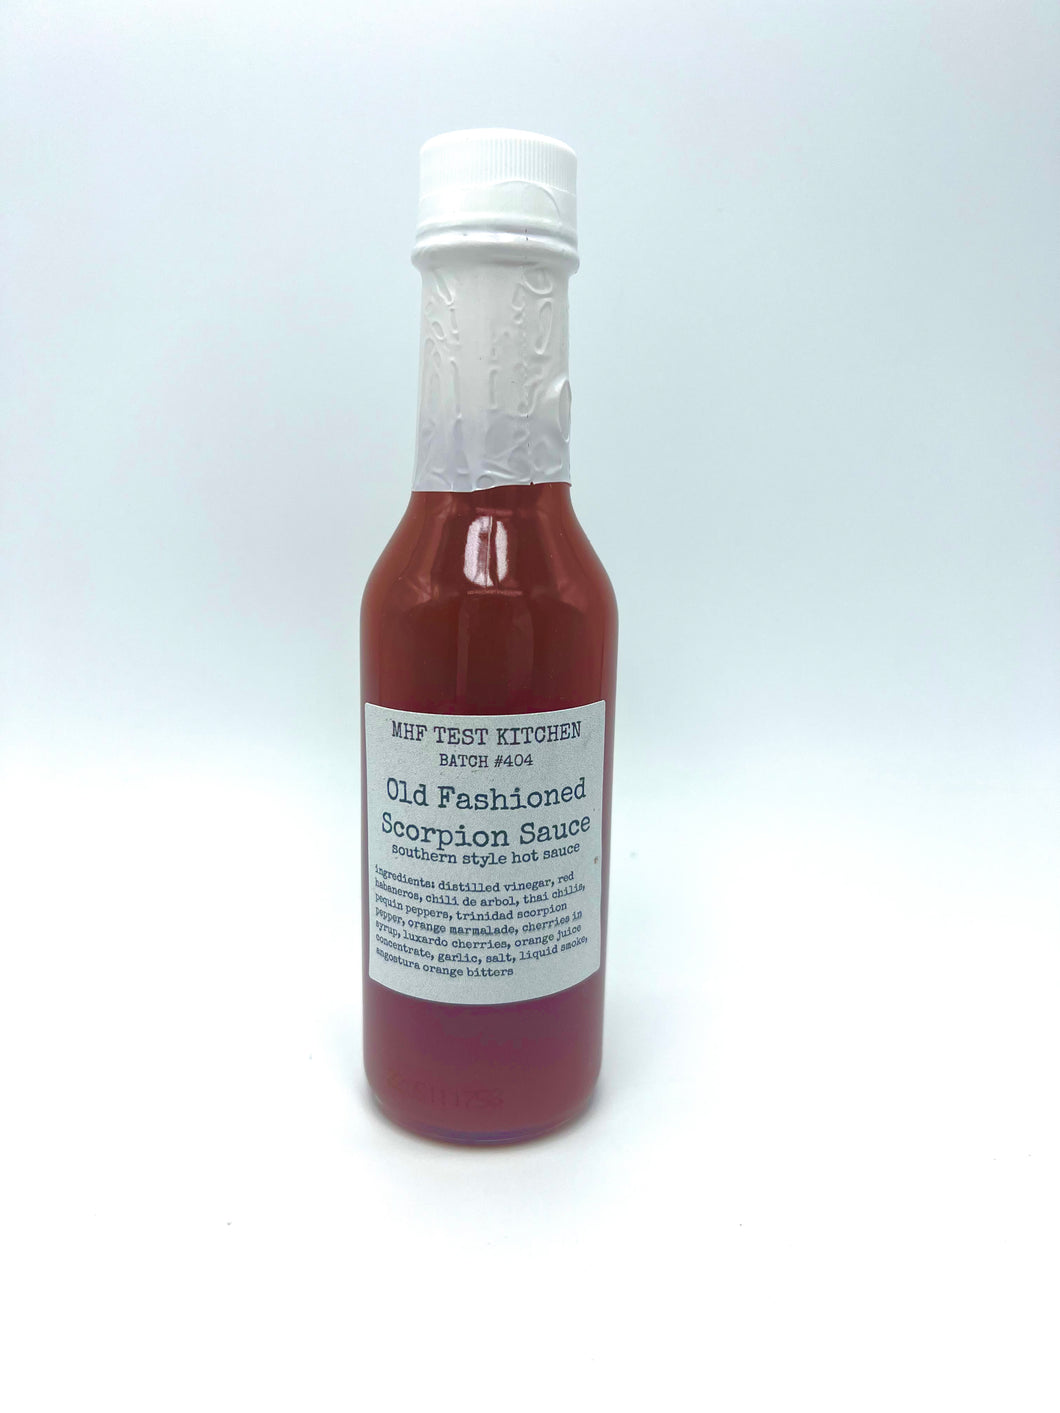 NEW! Old Fashioned Scorpion Sauce diner style hot sauce